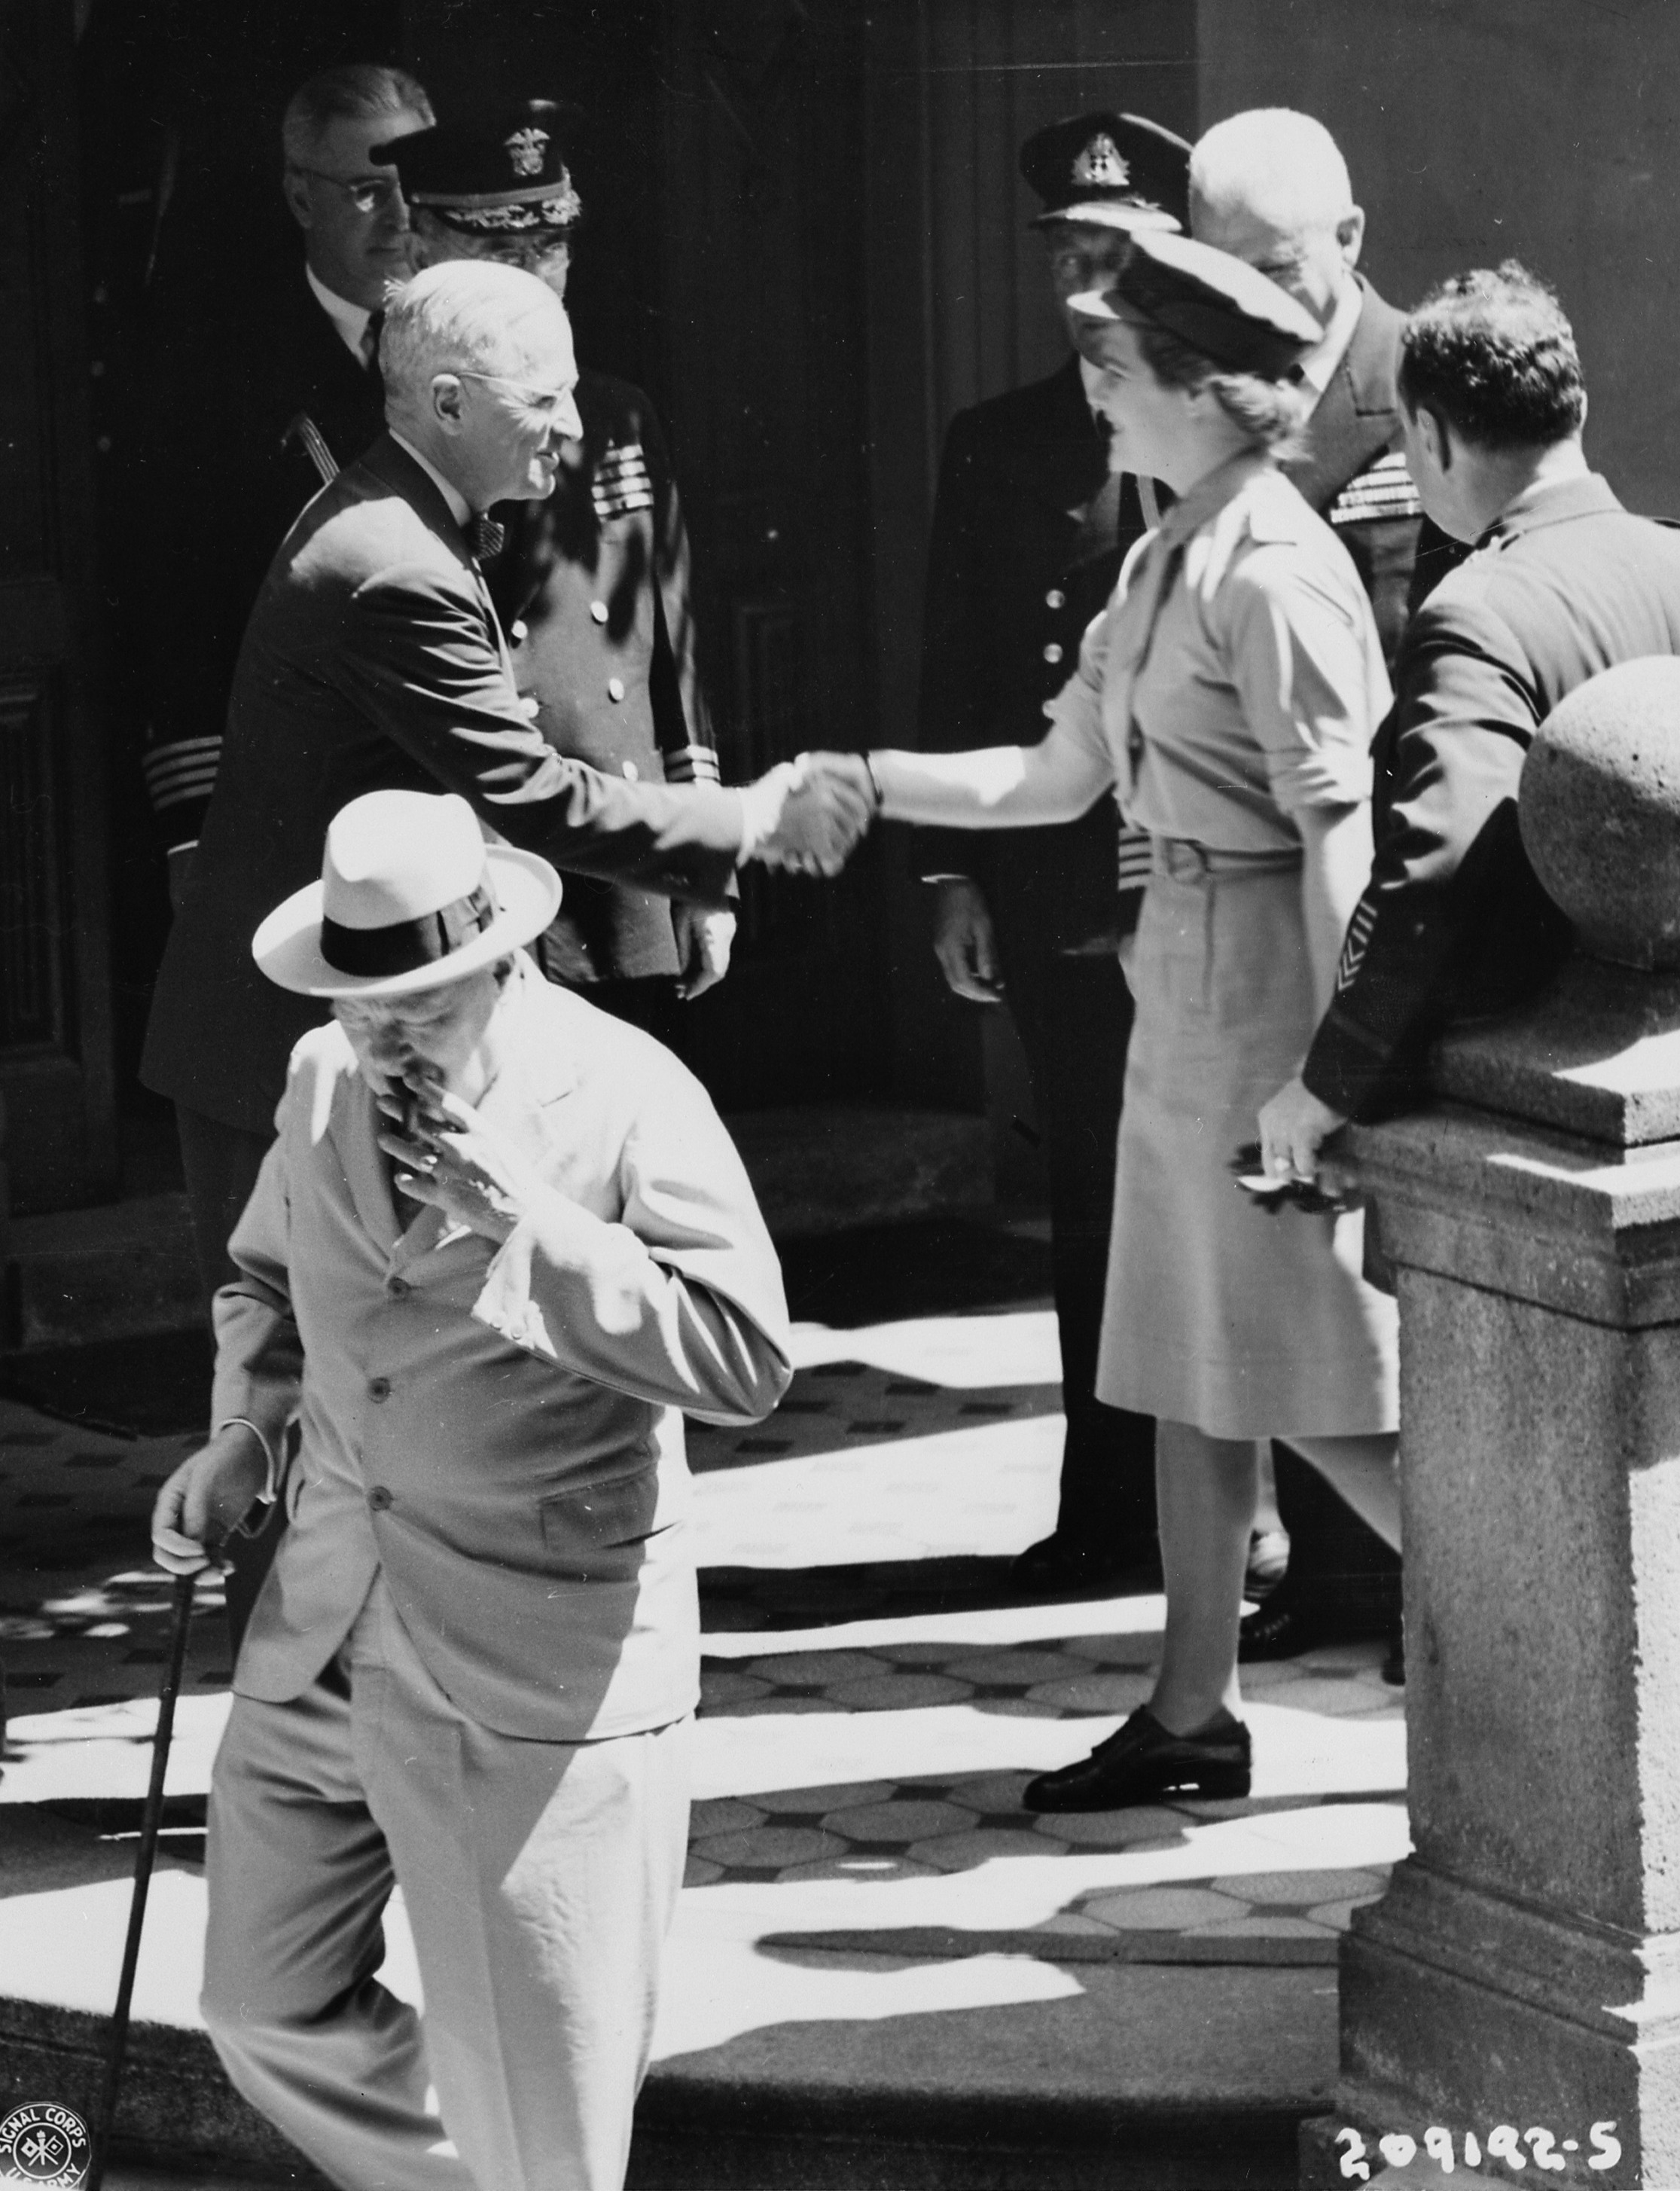 Harry Truman saying goodbye to Mary Churchill after meeting at his residence during Potsdam Conference, Germany, 16 Jul 1945; note presence of Winston Churchill, William Leahy, Dwight Eisenhower, and Harry Vaughn